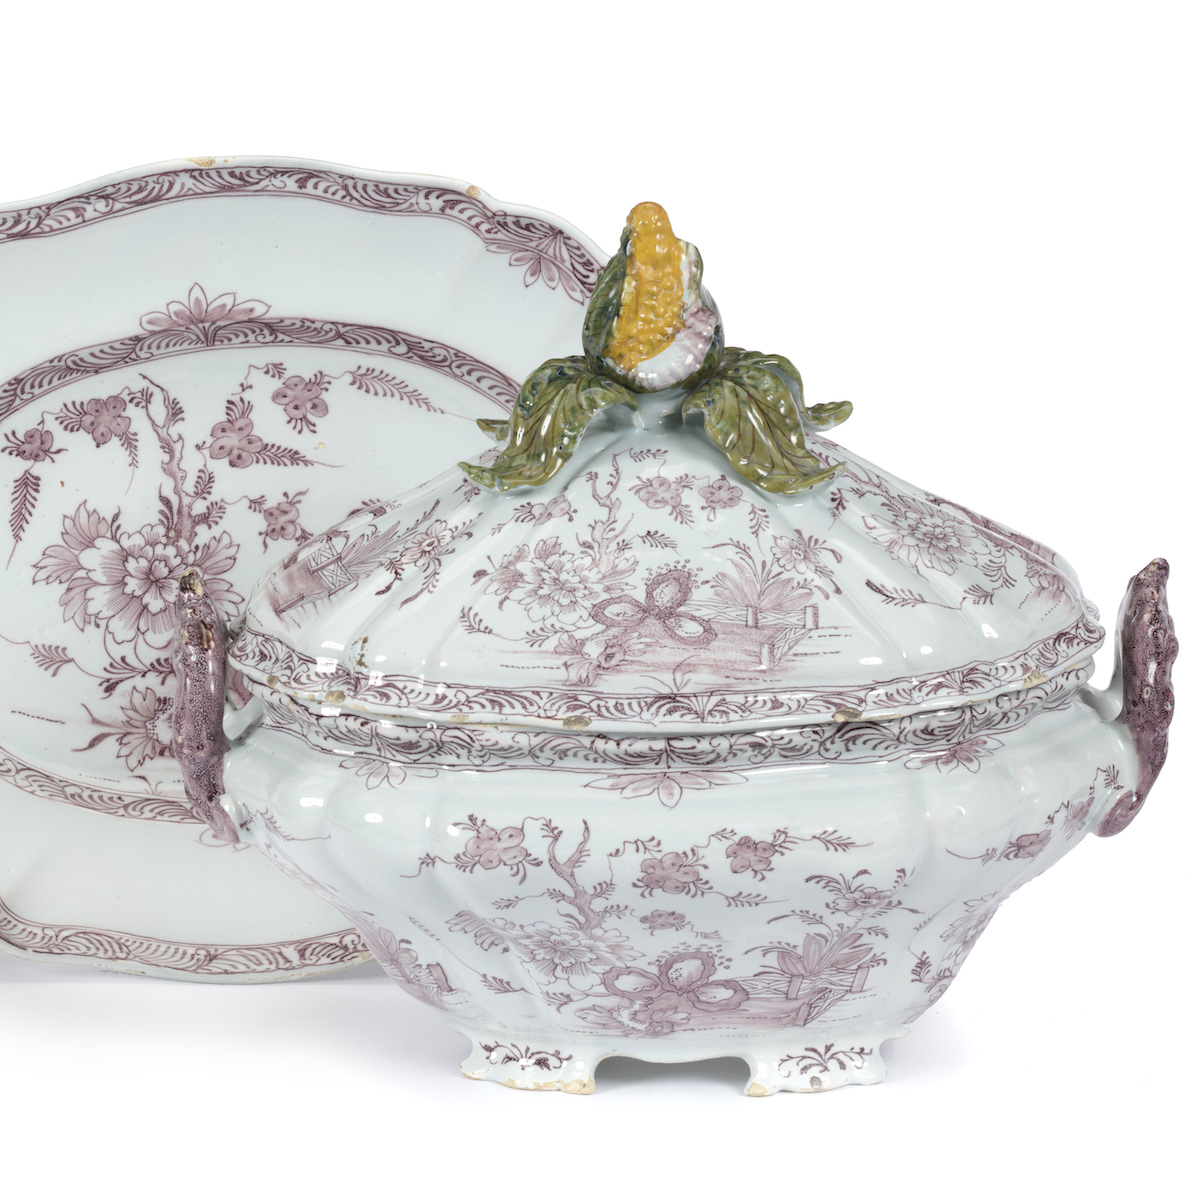 Manganese Delft tureen, cover and stand